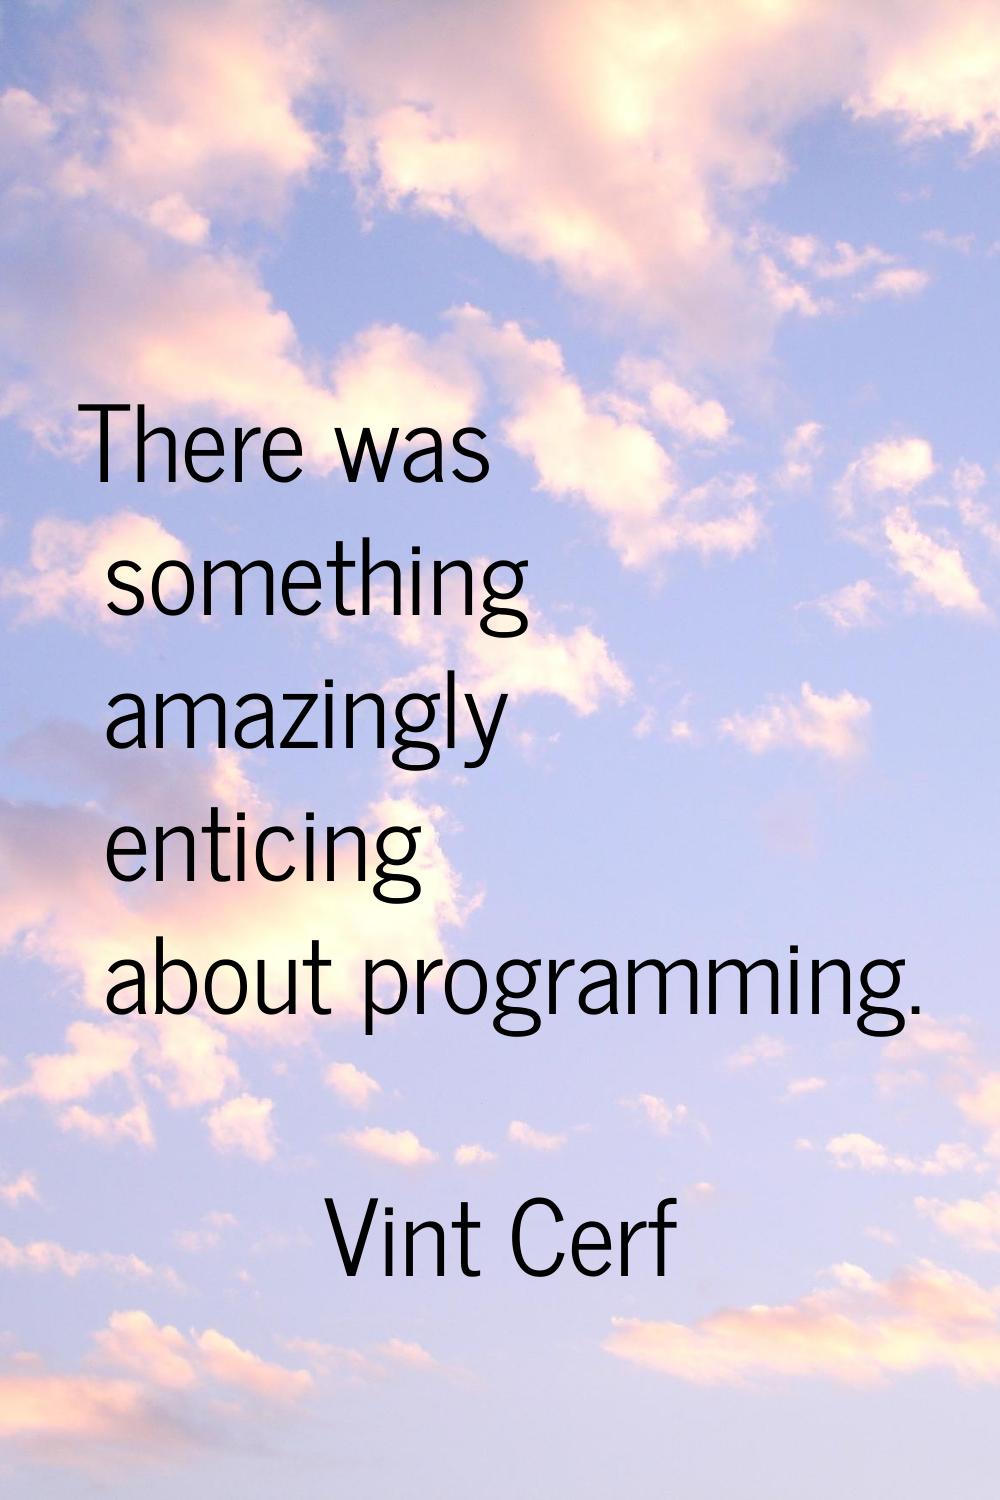 There was something amazingly enticing about programming.